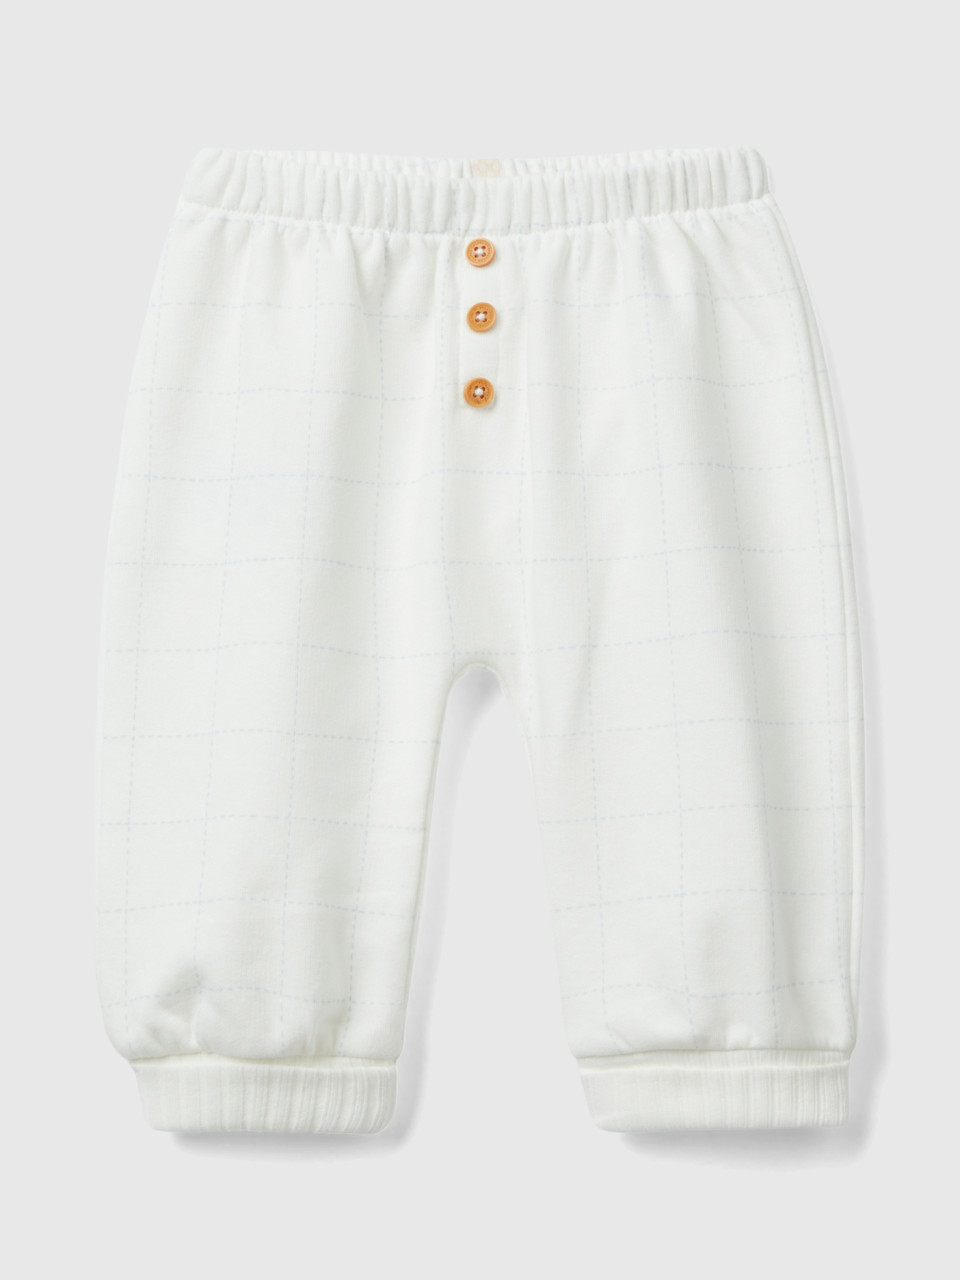 Benetton, Sweatpants With Buttons, Creamy White, Kids